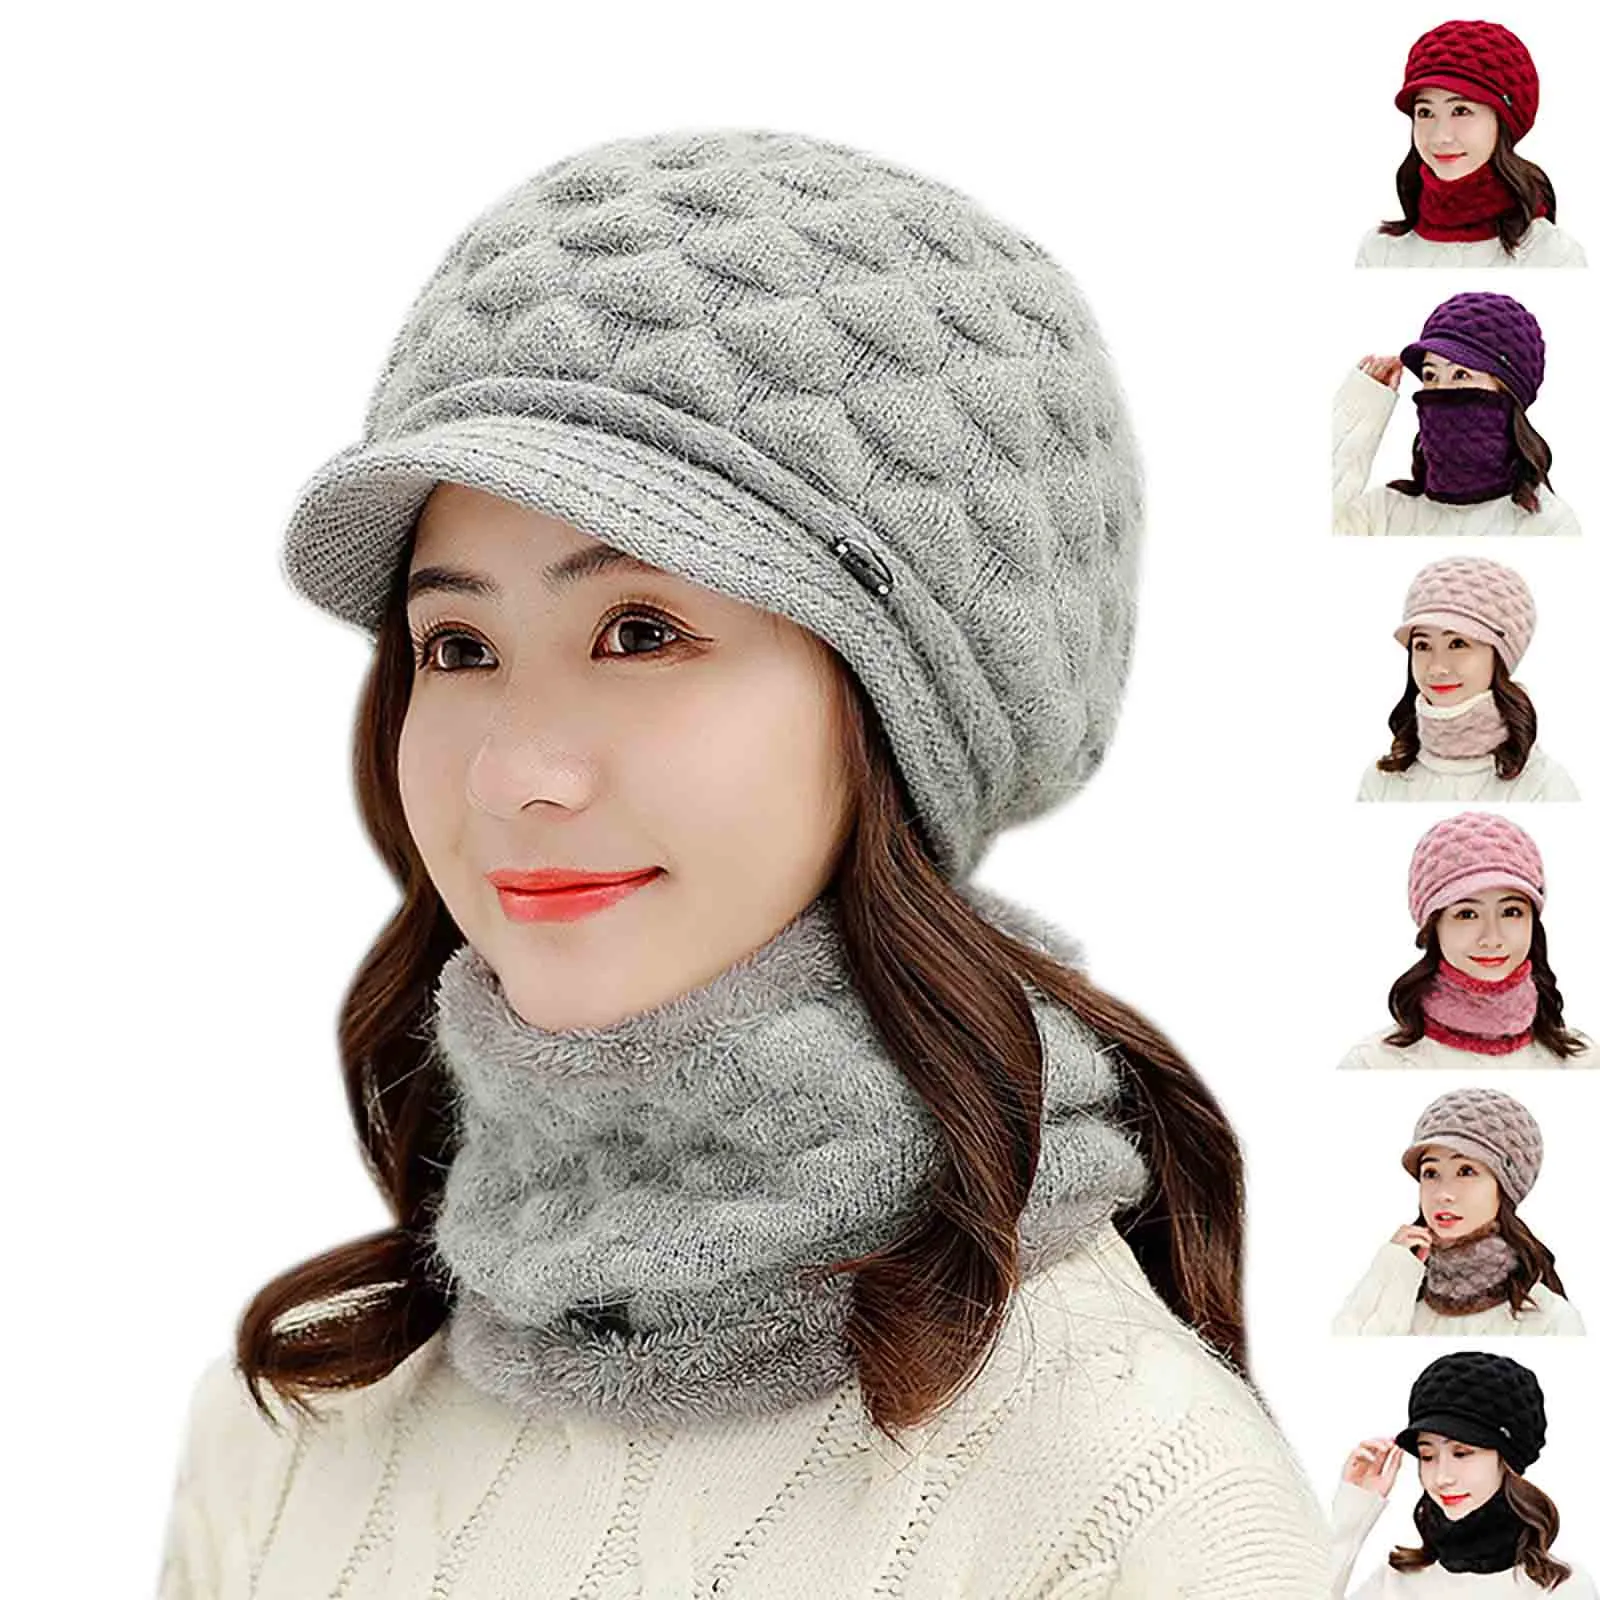 

Hat for Women Knitted Woolen Hat Plus Velvet Thicken Keep Warm T-riangle D-uck Tongue Cap Scarf Gorros Female апка женская 5*